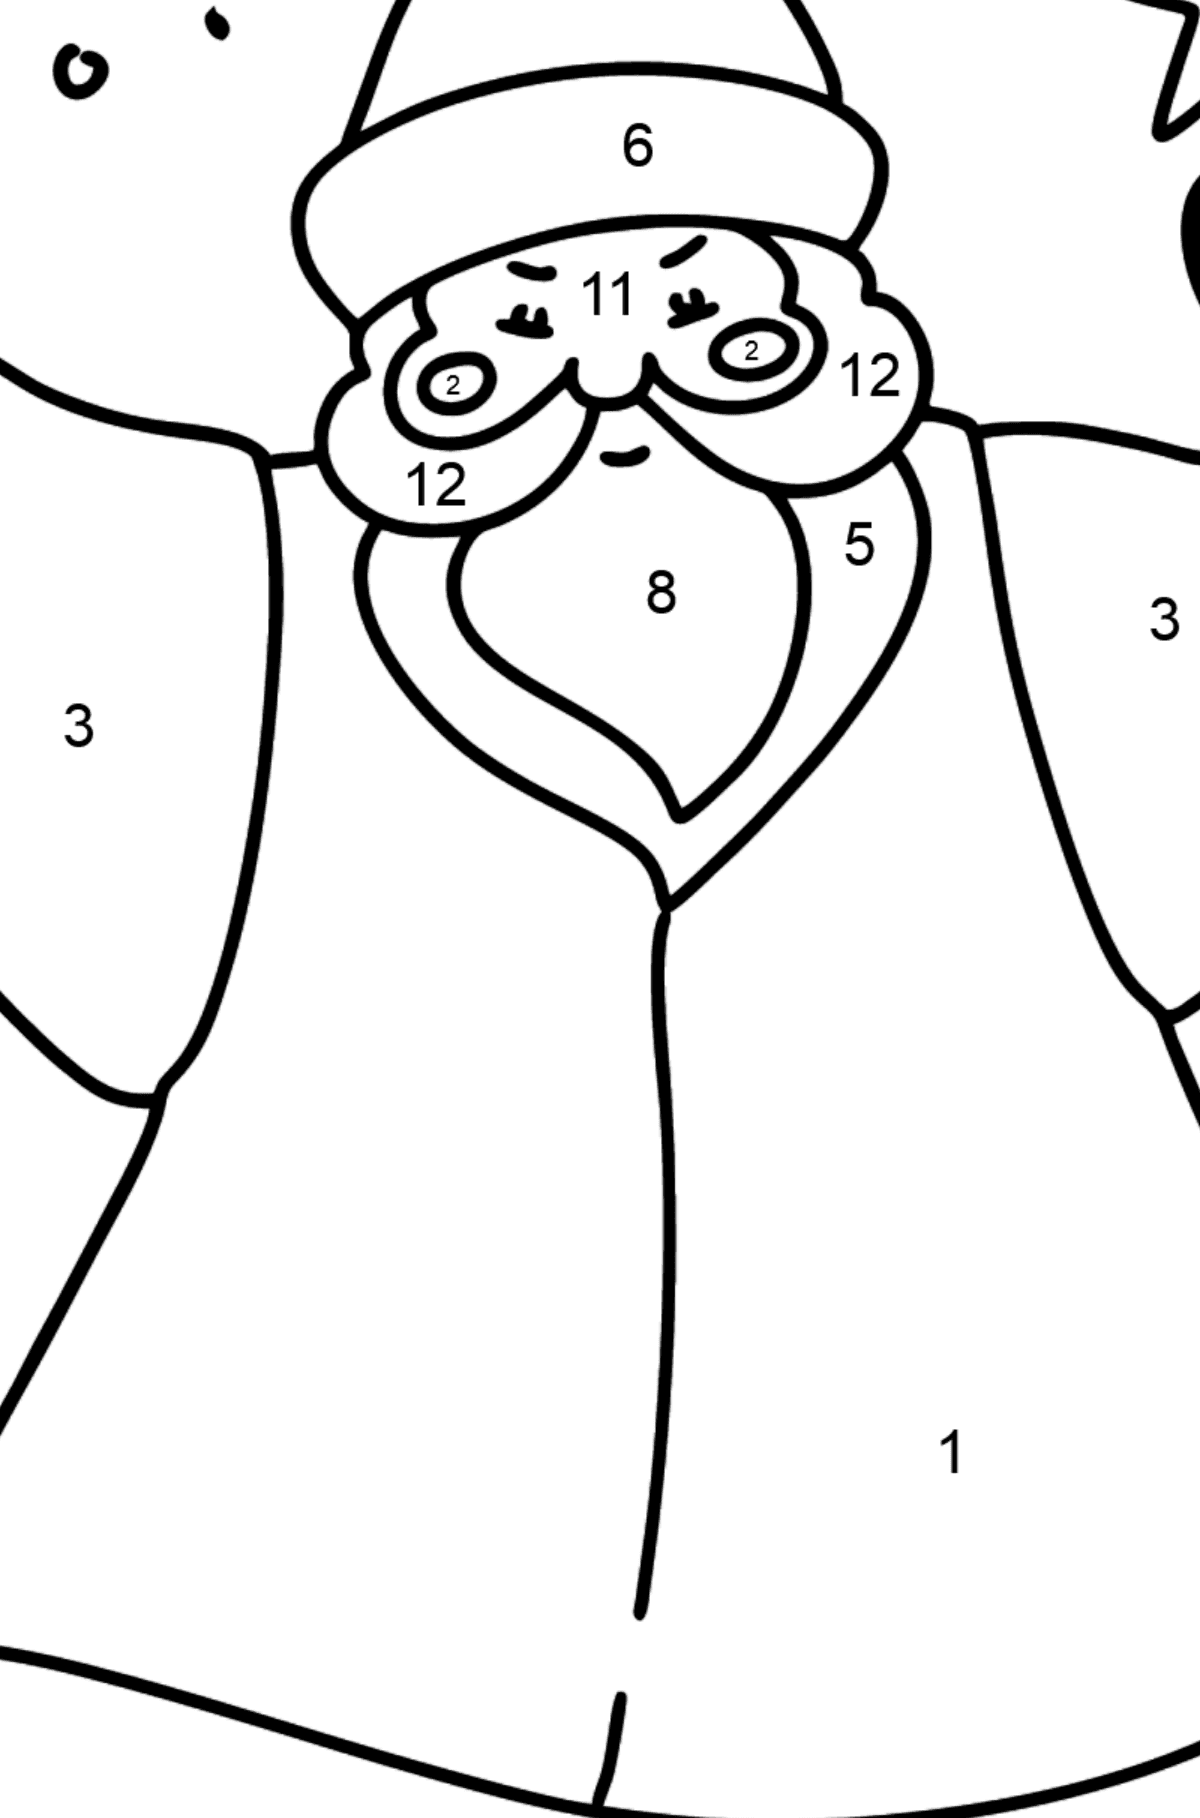 Father Frost coloring page - Coloring by Numbers for Kids